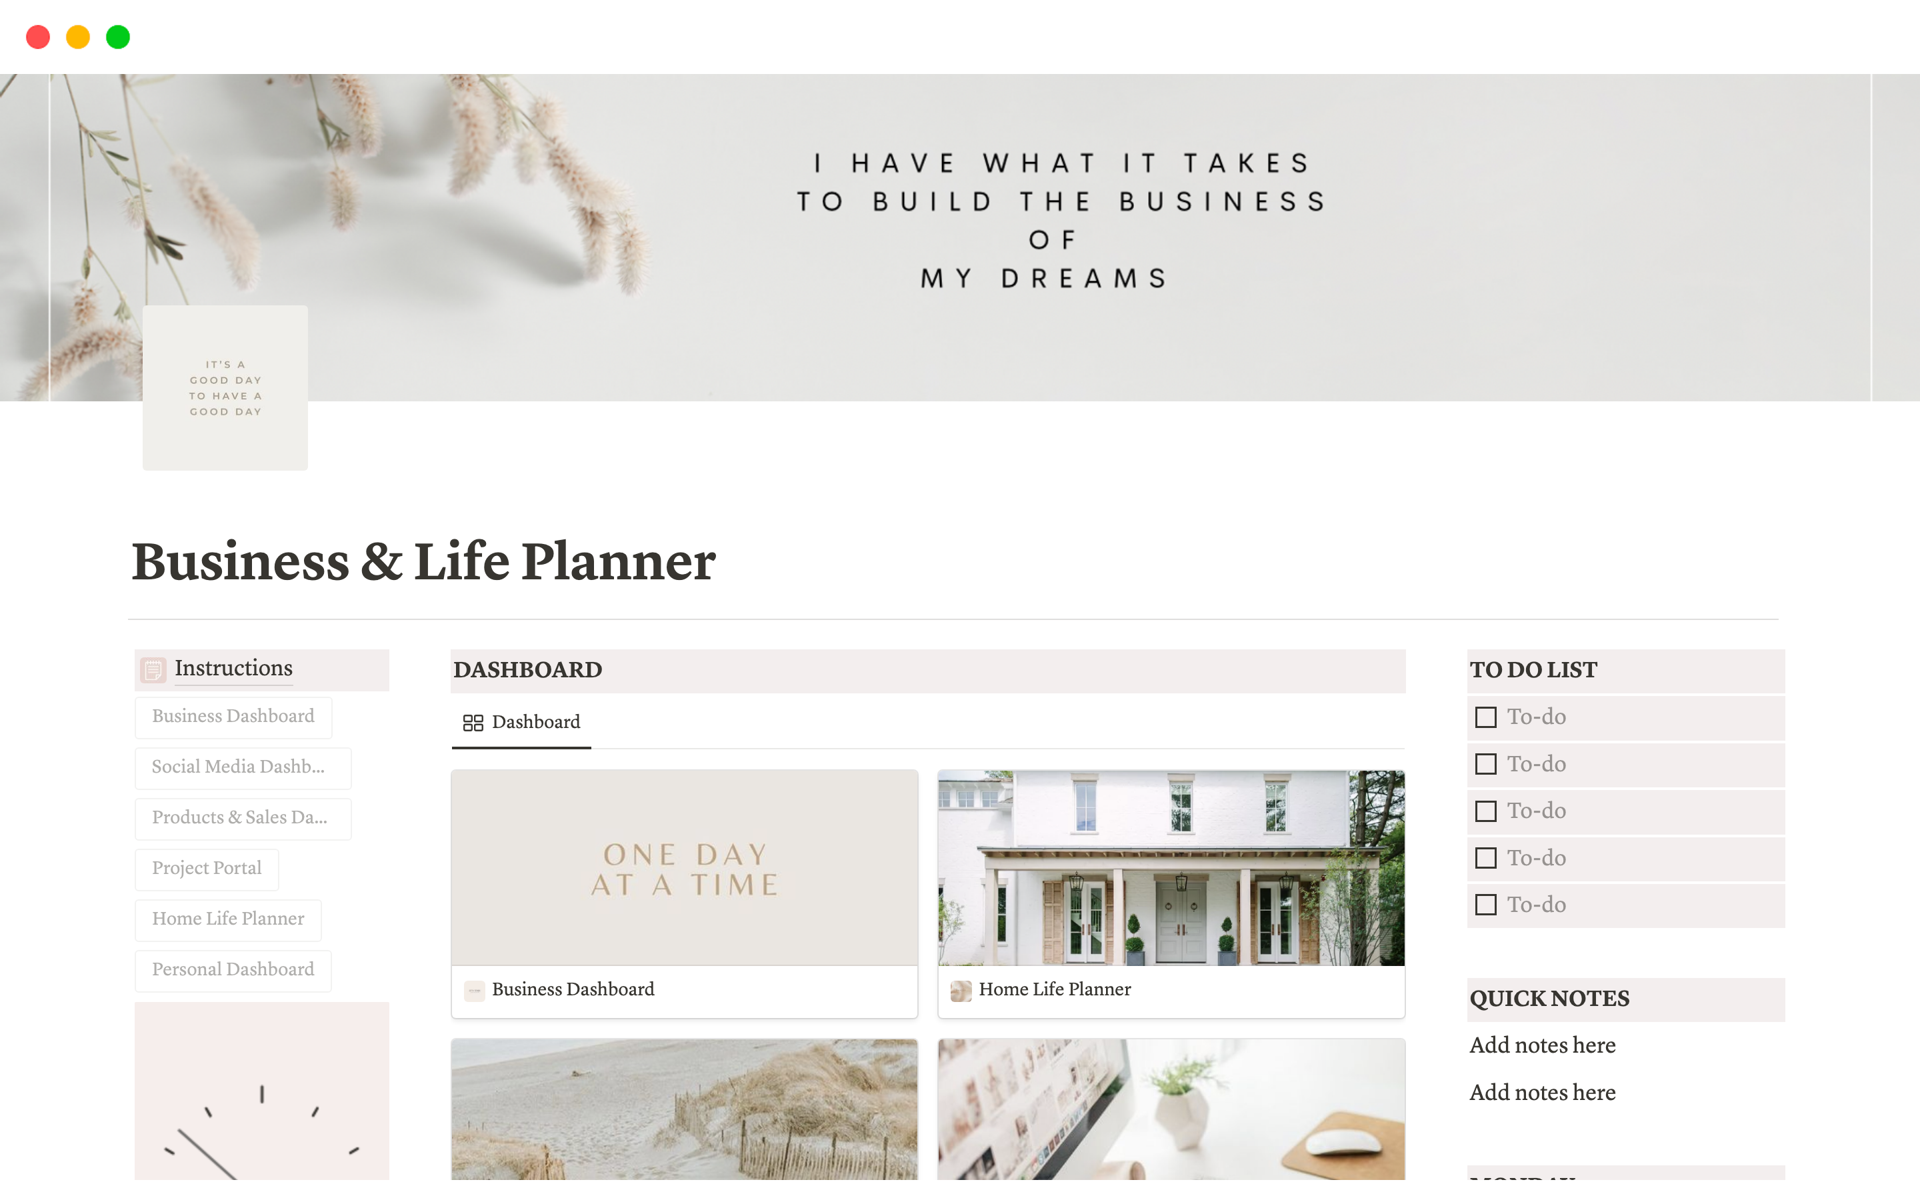 The Notion Business and life planner will organise everything in your business and home life - Whether you're looking to start a business or have an existing business this will help with productivity and keep you organised